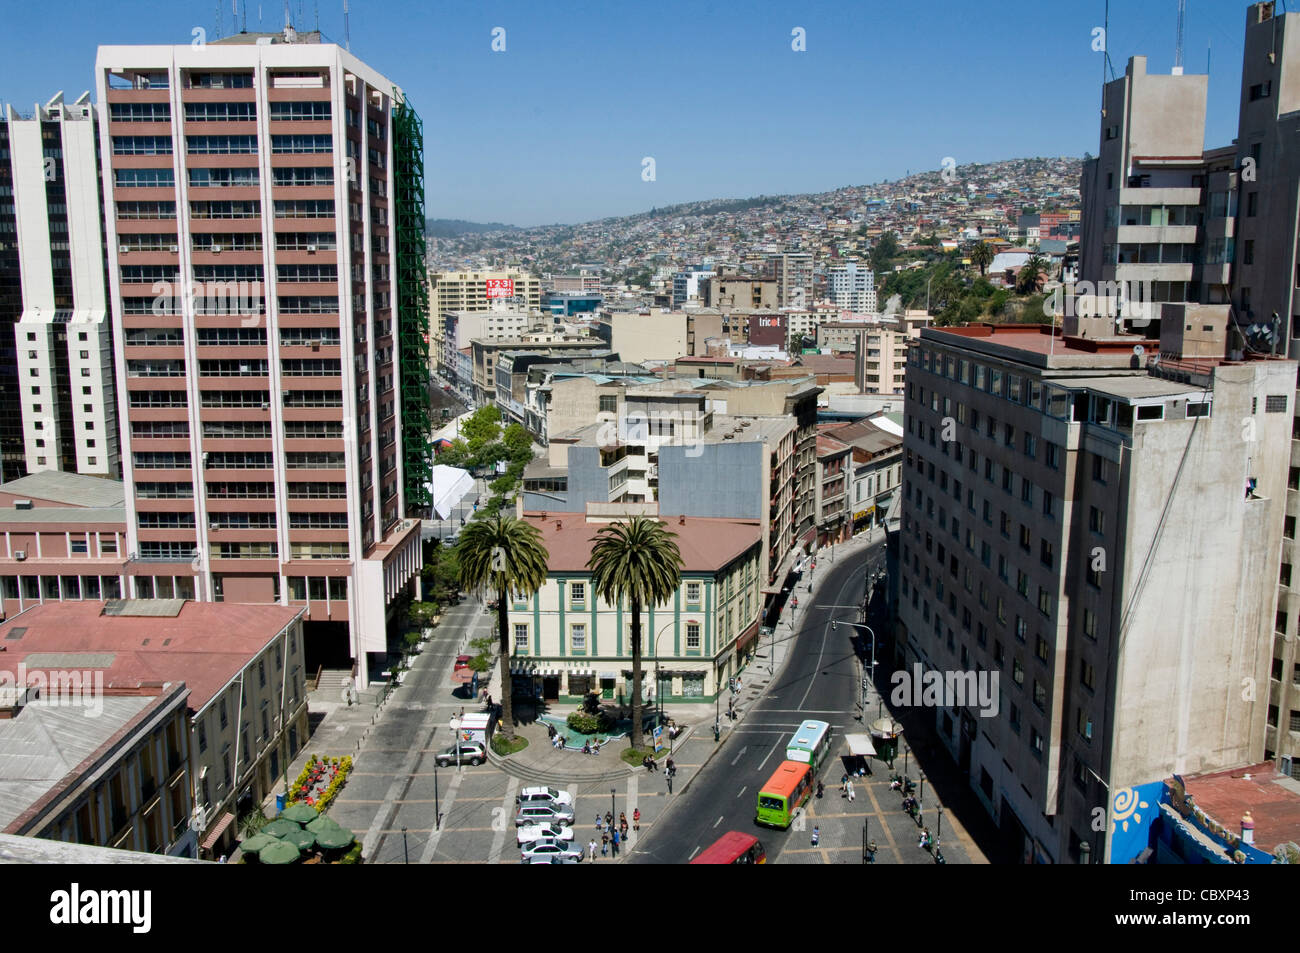 Chile. Valparaiso city. Aerial view of city center. World heritage Site. Stock Photo